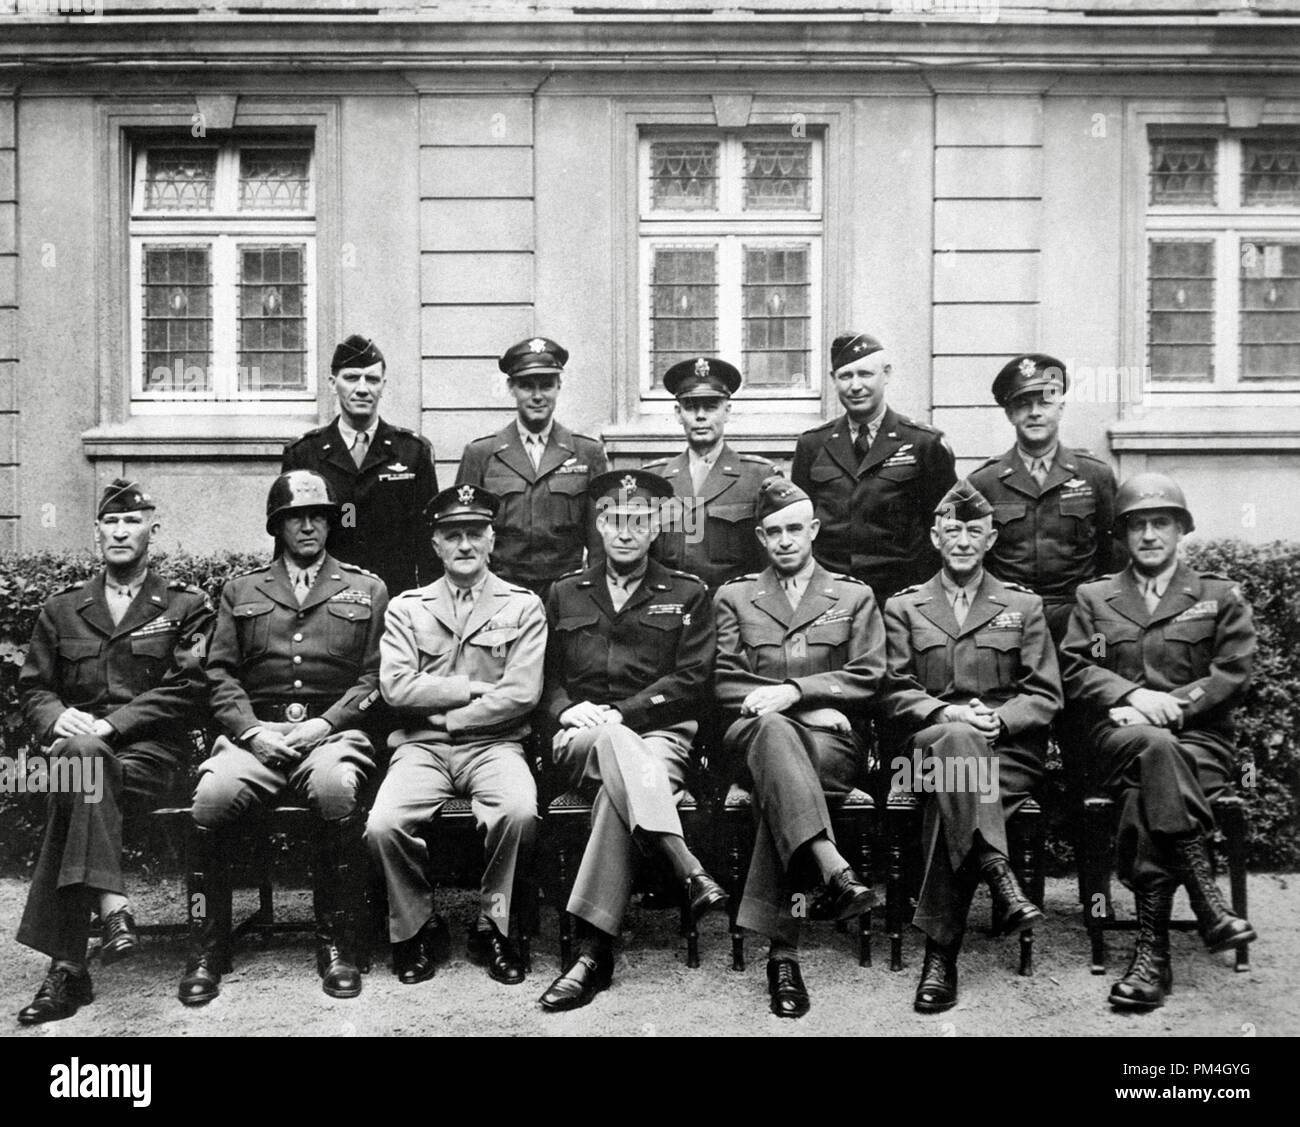 World War 2. Seated are Simpson, George Patton, Spaatz, Dwight D. Eisenhower, Bradley, Hodges and Gerow. Standing are Stearley, Vandenberg, Smith, Weyland and Nugent.' Circa 1945.   File Reference # 1003 149THA Stock Photo